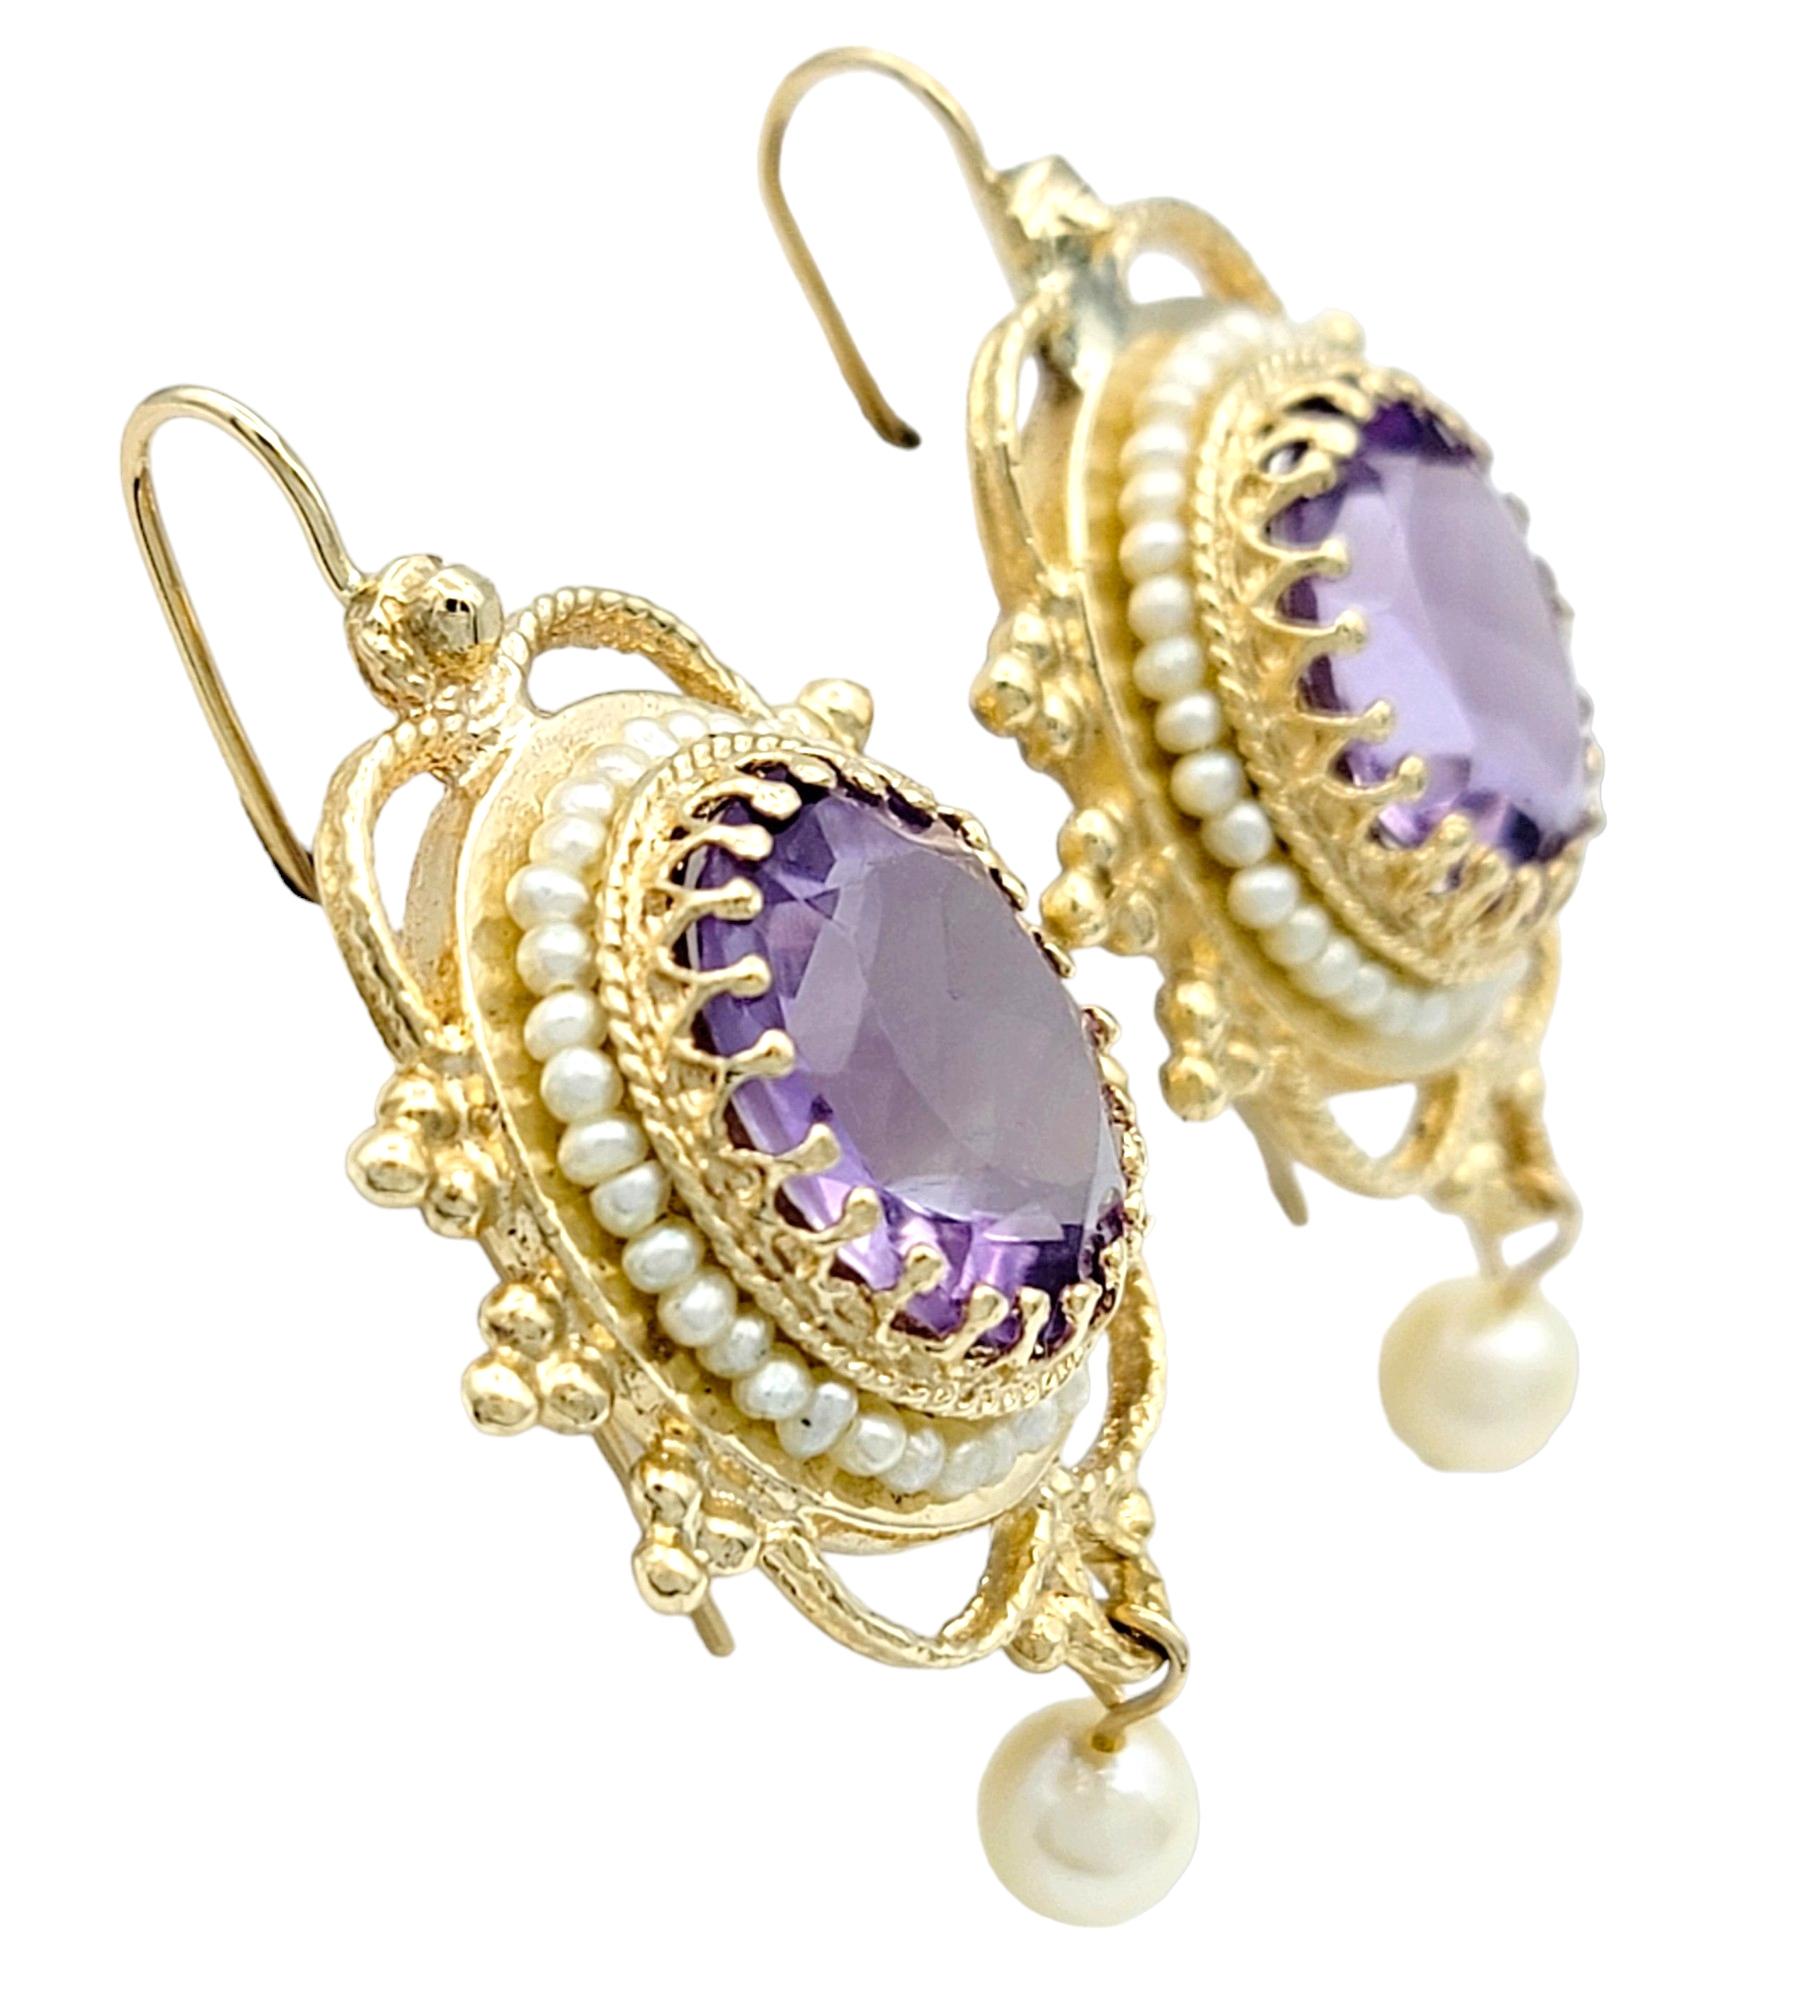 These exquisite earrings showcase an elegant blend of timeless sophistication and artistic craftsmanship. Fashioned from lustrous 14 karat yellow gold, each earring features a captivating oval amethyst nestled at its center, accented by a delicate